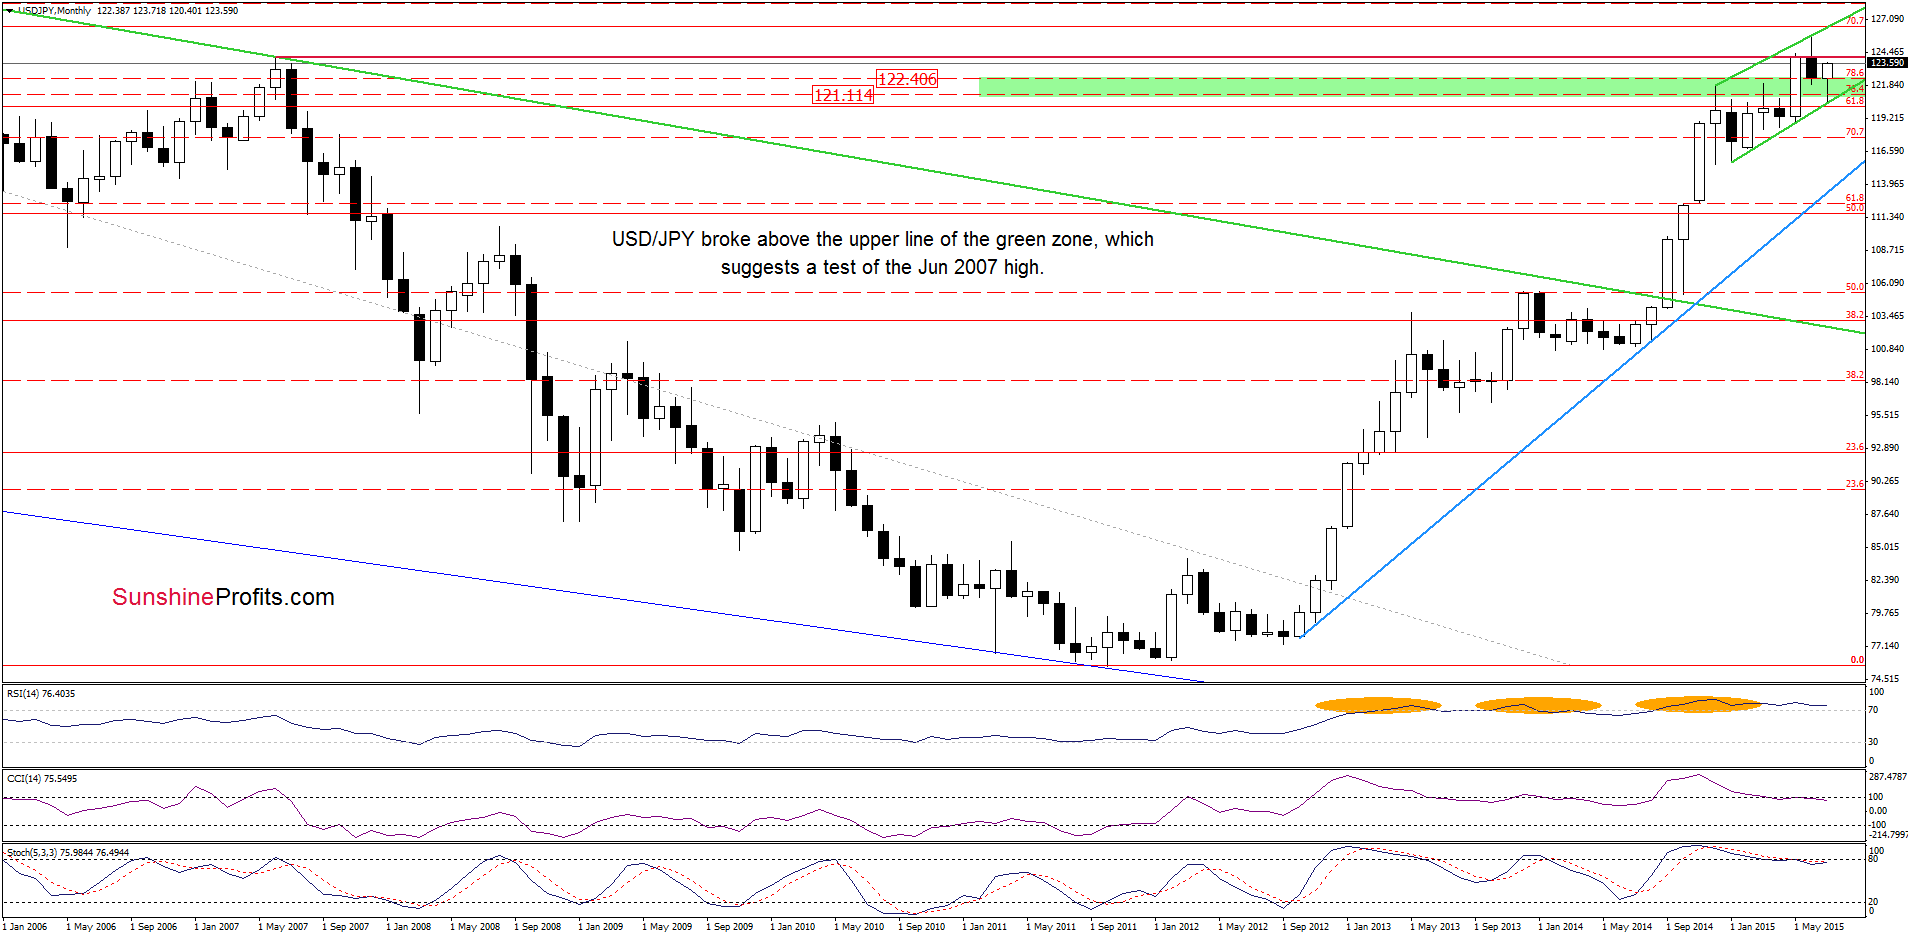 USD/JPY - the monthly chart